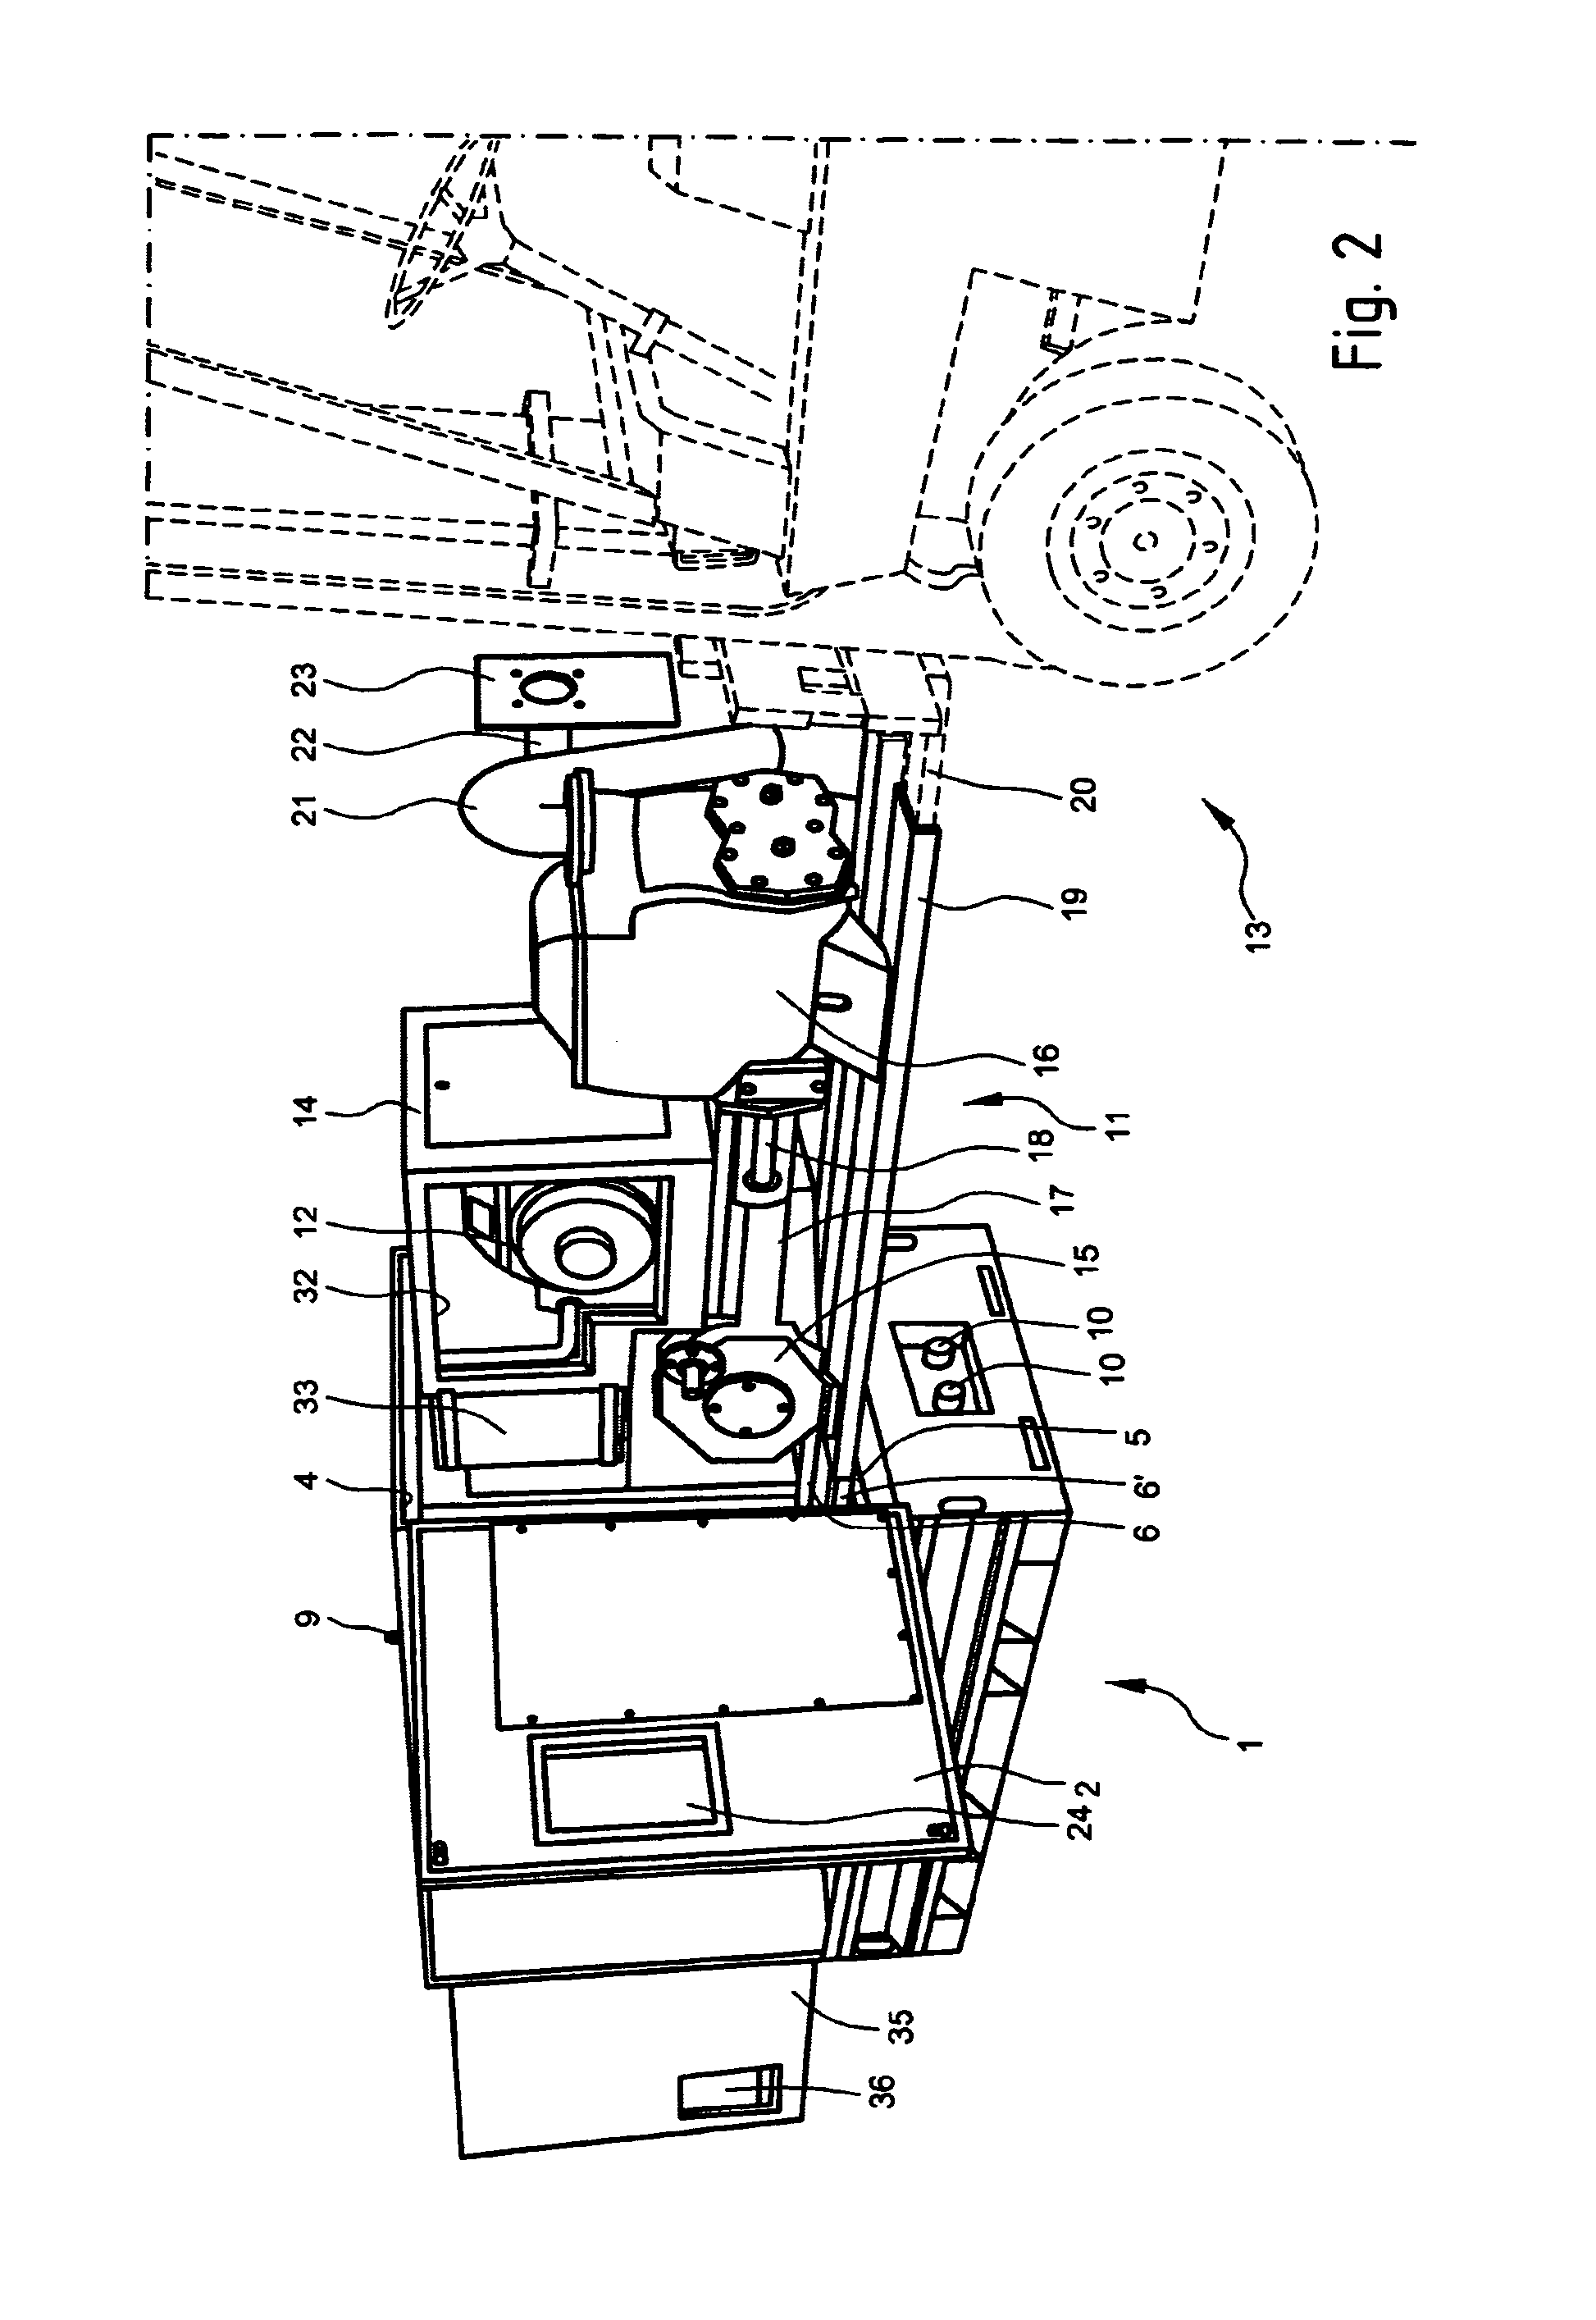 Sound-damping housing for a pump and for a drive motor for said pump